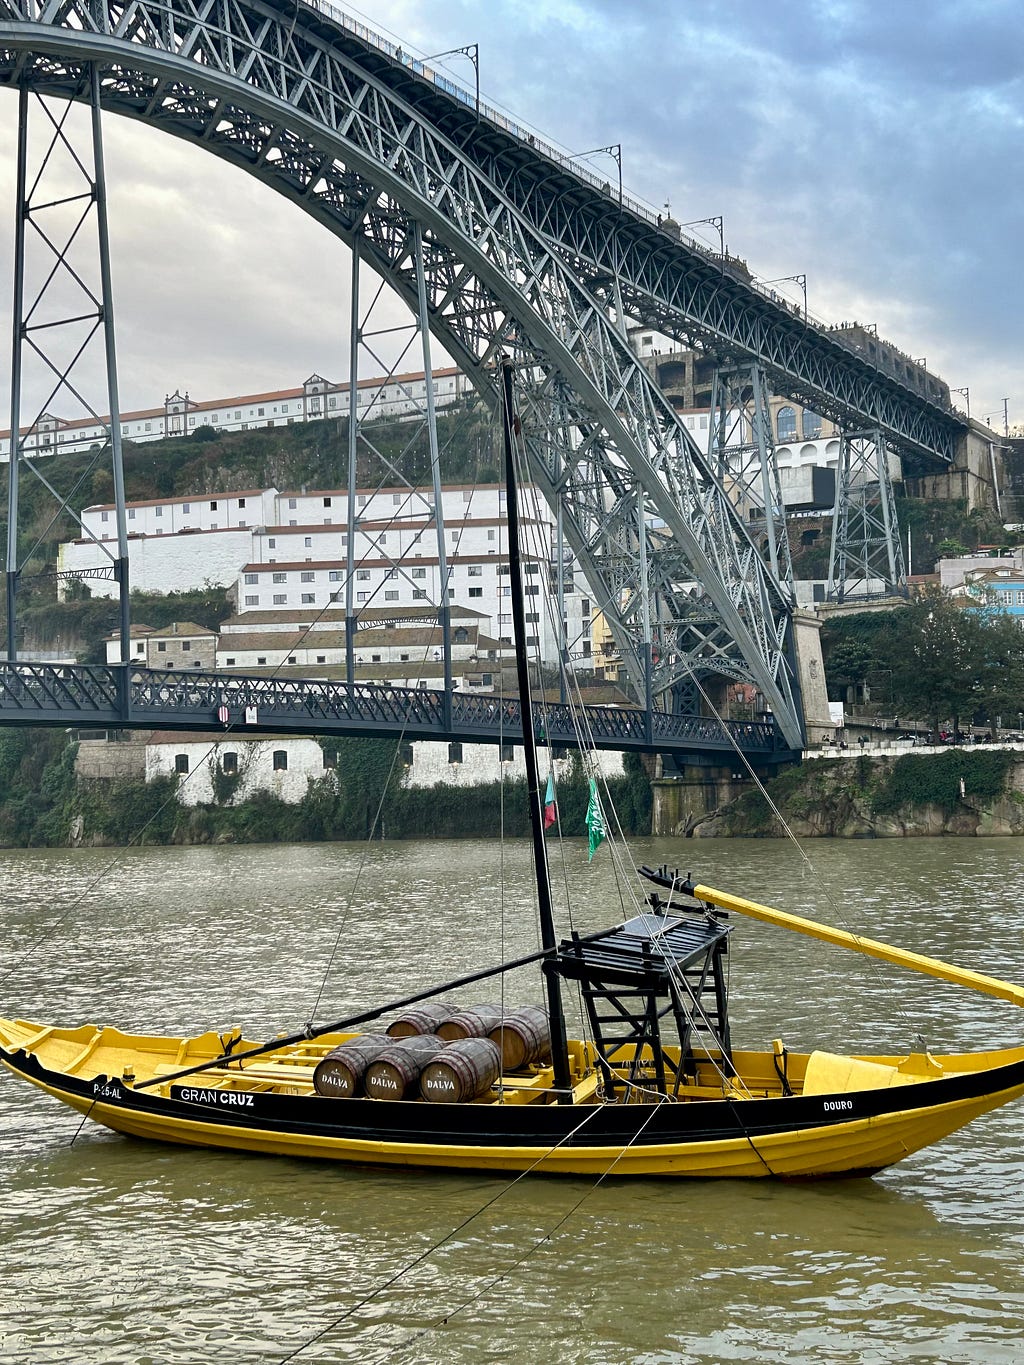 Porto, Luis I bridge and the Douro river with a barge